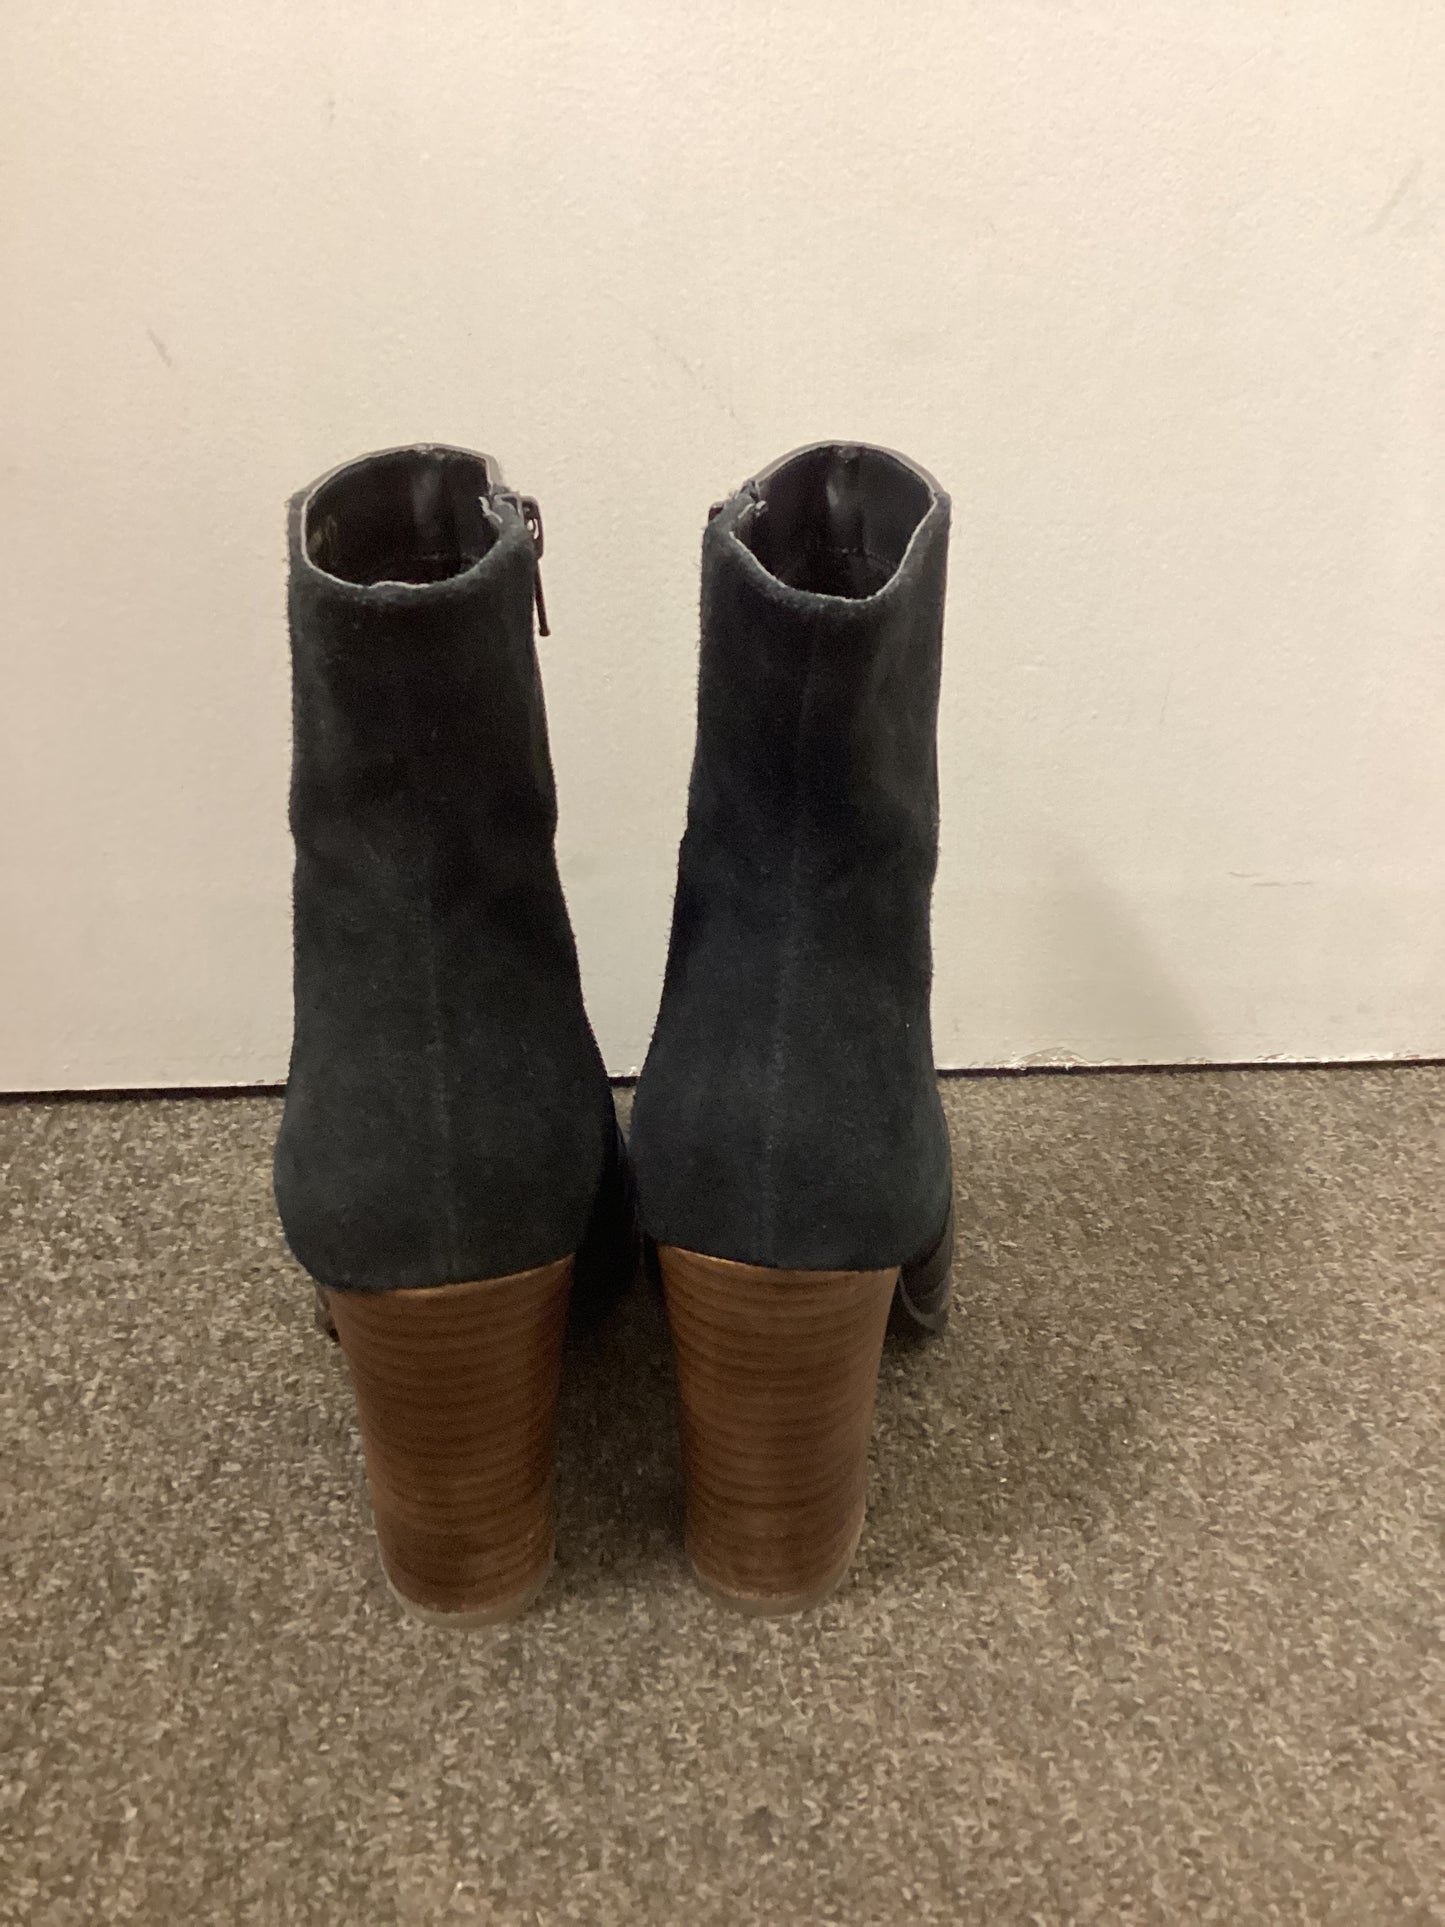 Faith Black and Brown Leather and Suede Boots Size UK 5